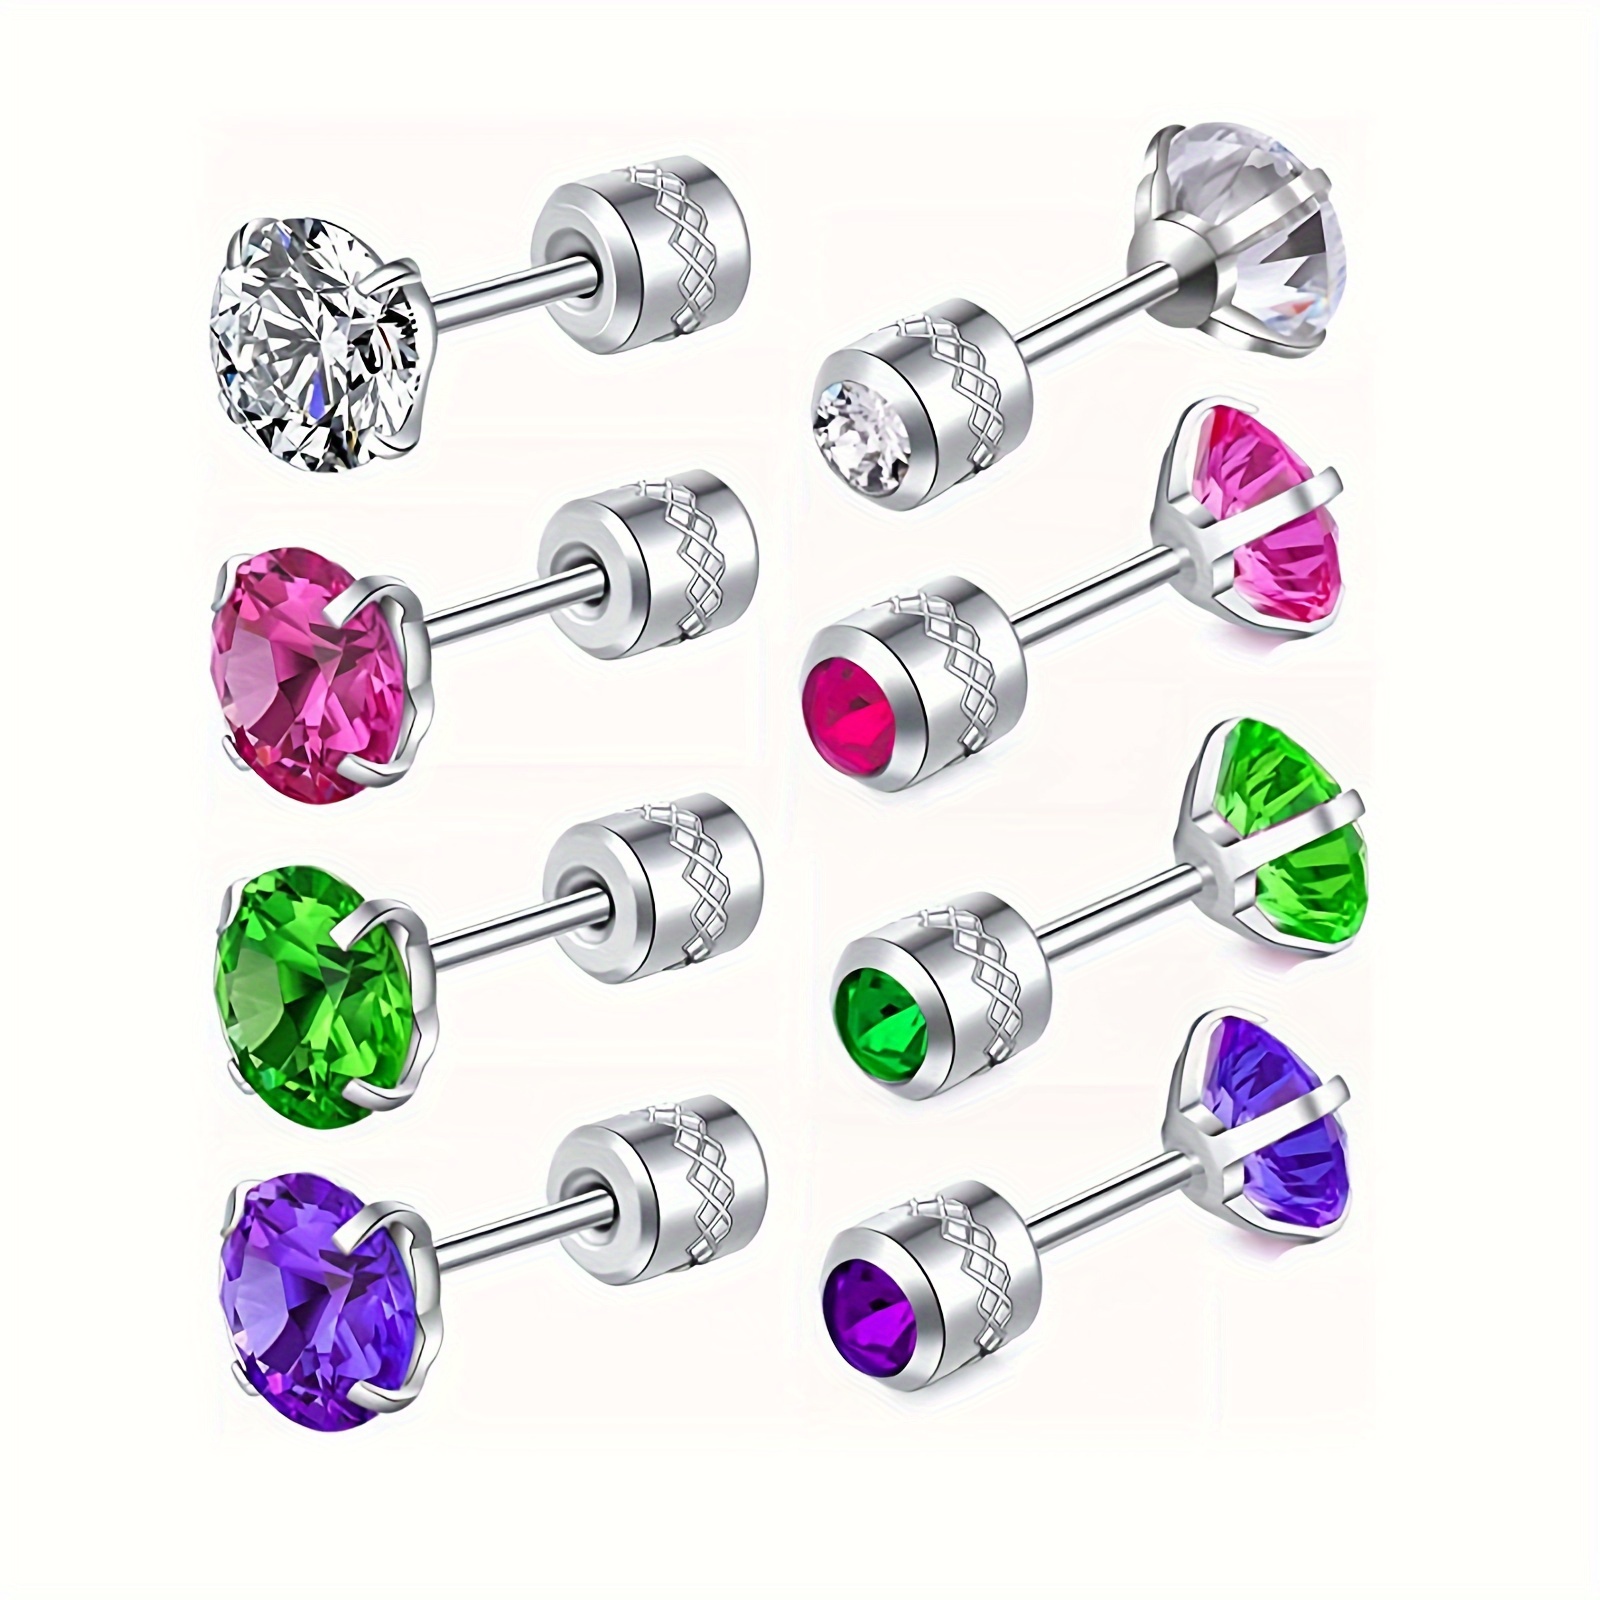 

4 Pairs Titanium Steel Screw Back 5a Cubic Zirconia Earrings Set, Simple And Cute Style For Women Daily Wear